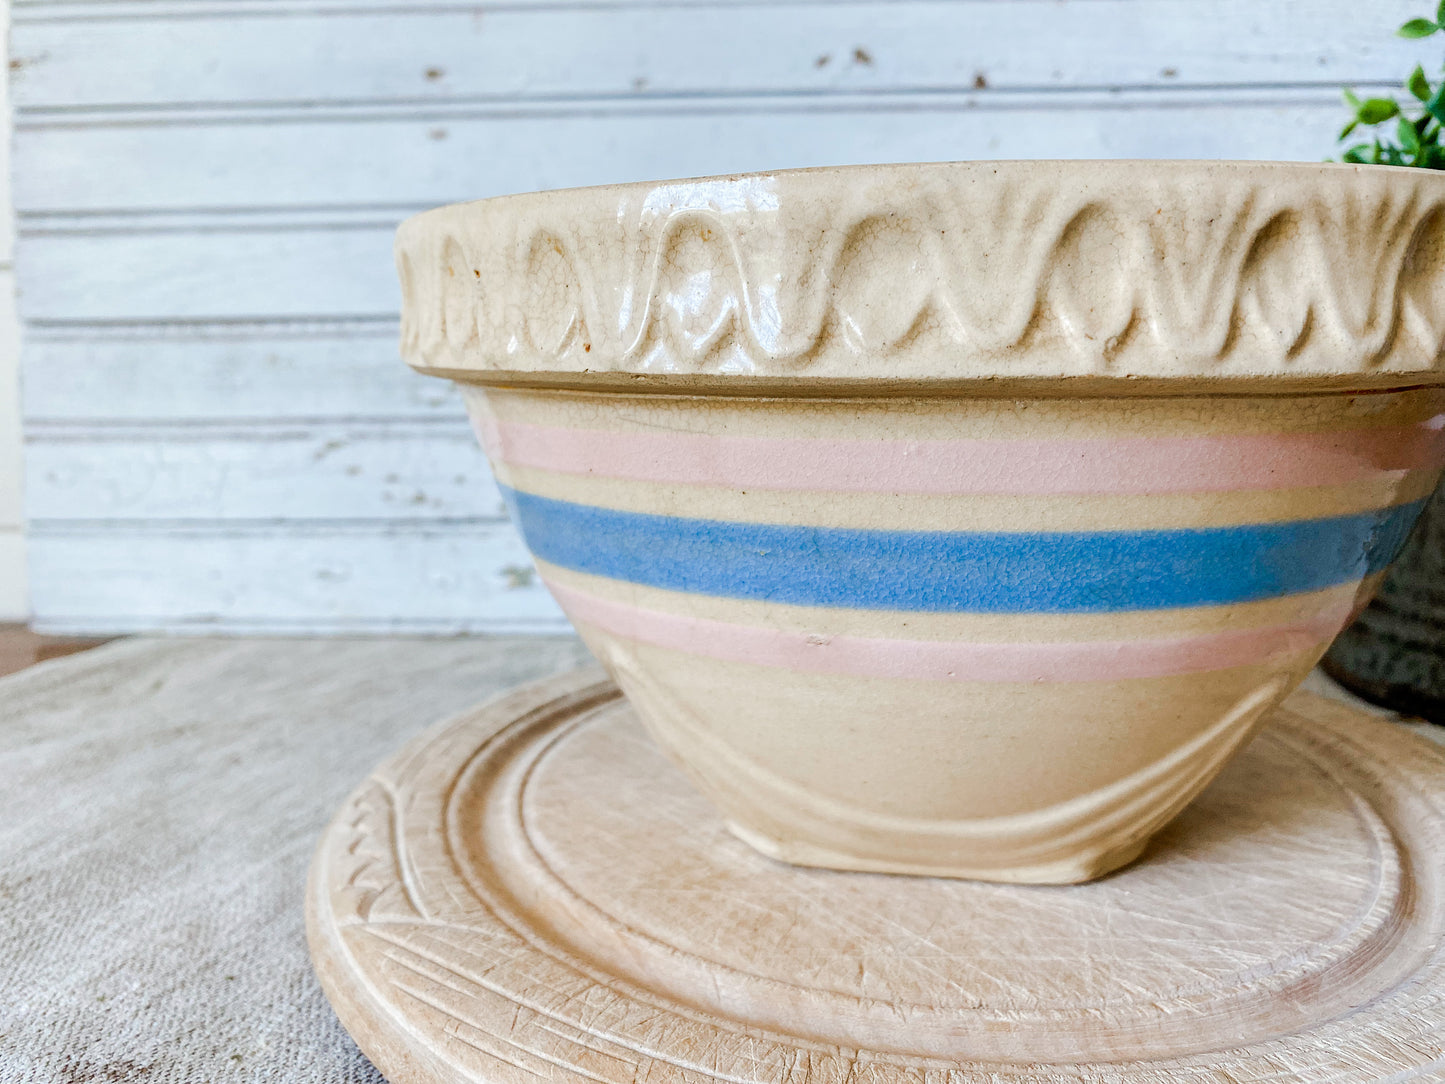 Antique Yellow Ware Mixing Bowl | 8" Blue and Pink Striped Crock Bowl